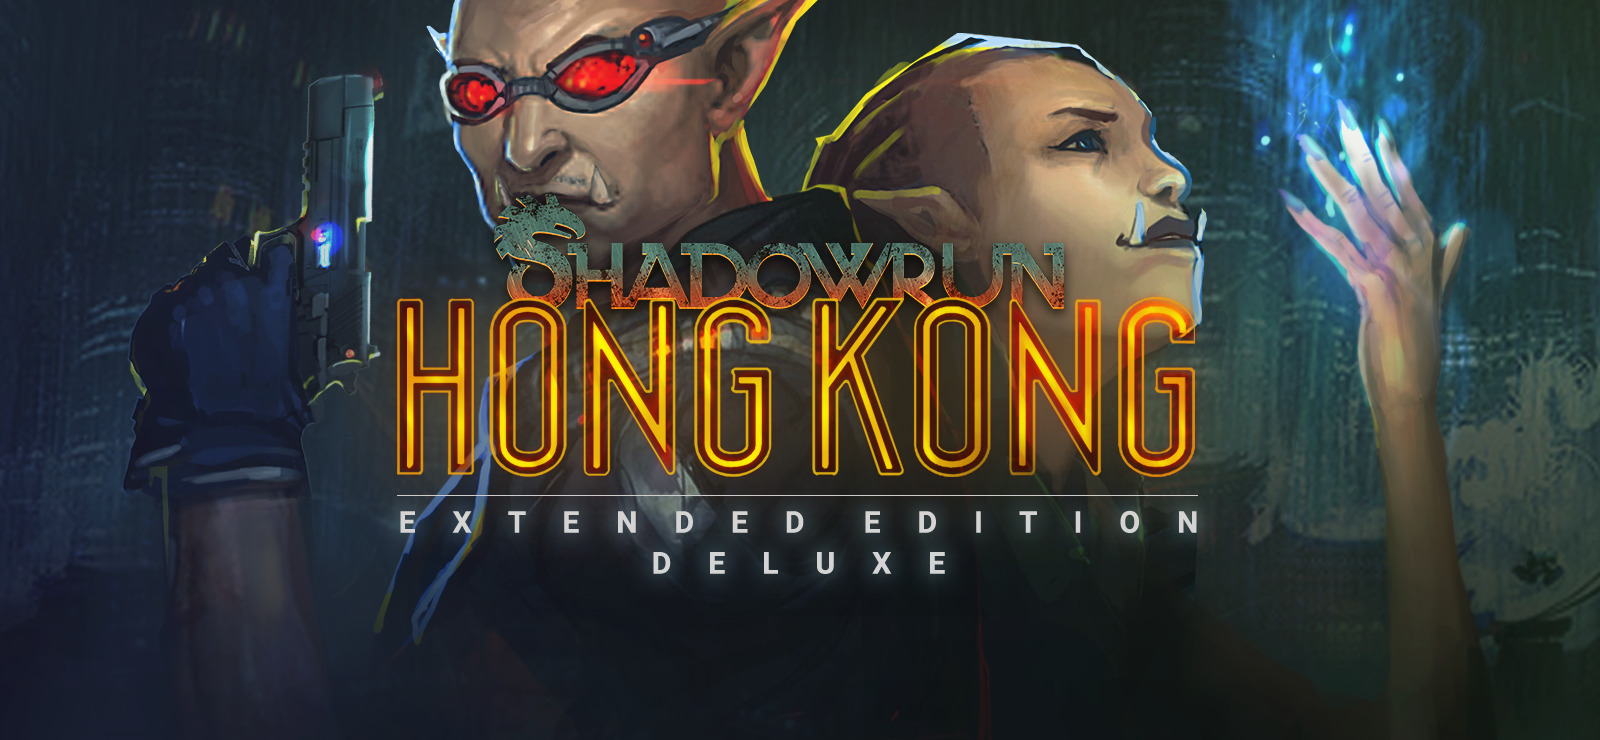 Shadowrun Hong Kong - Extended Edition Deluxe